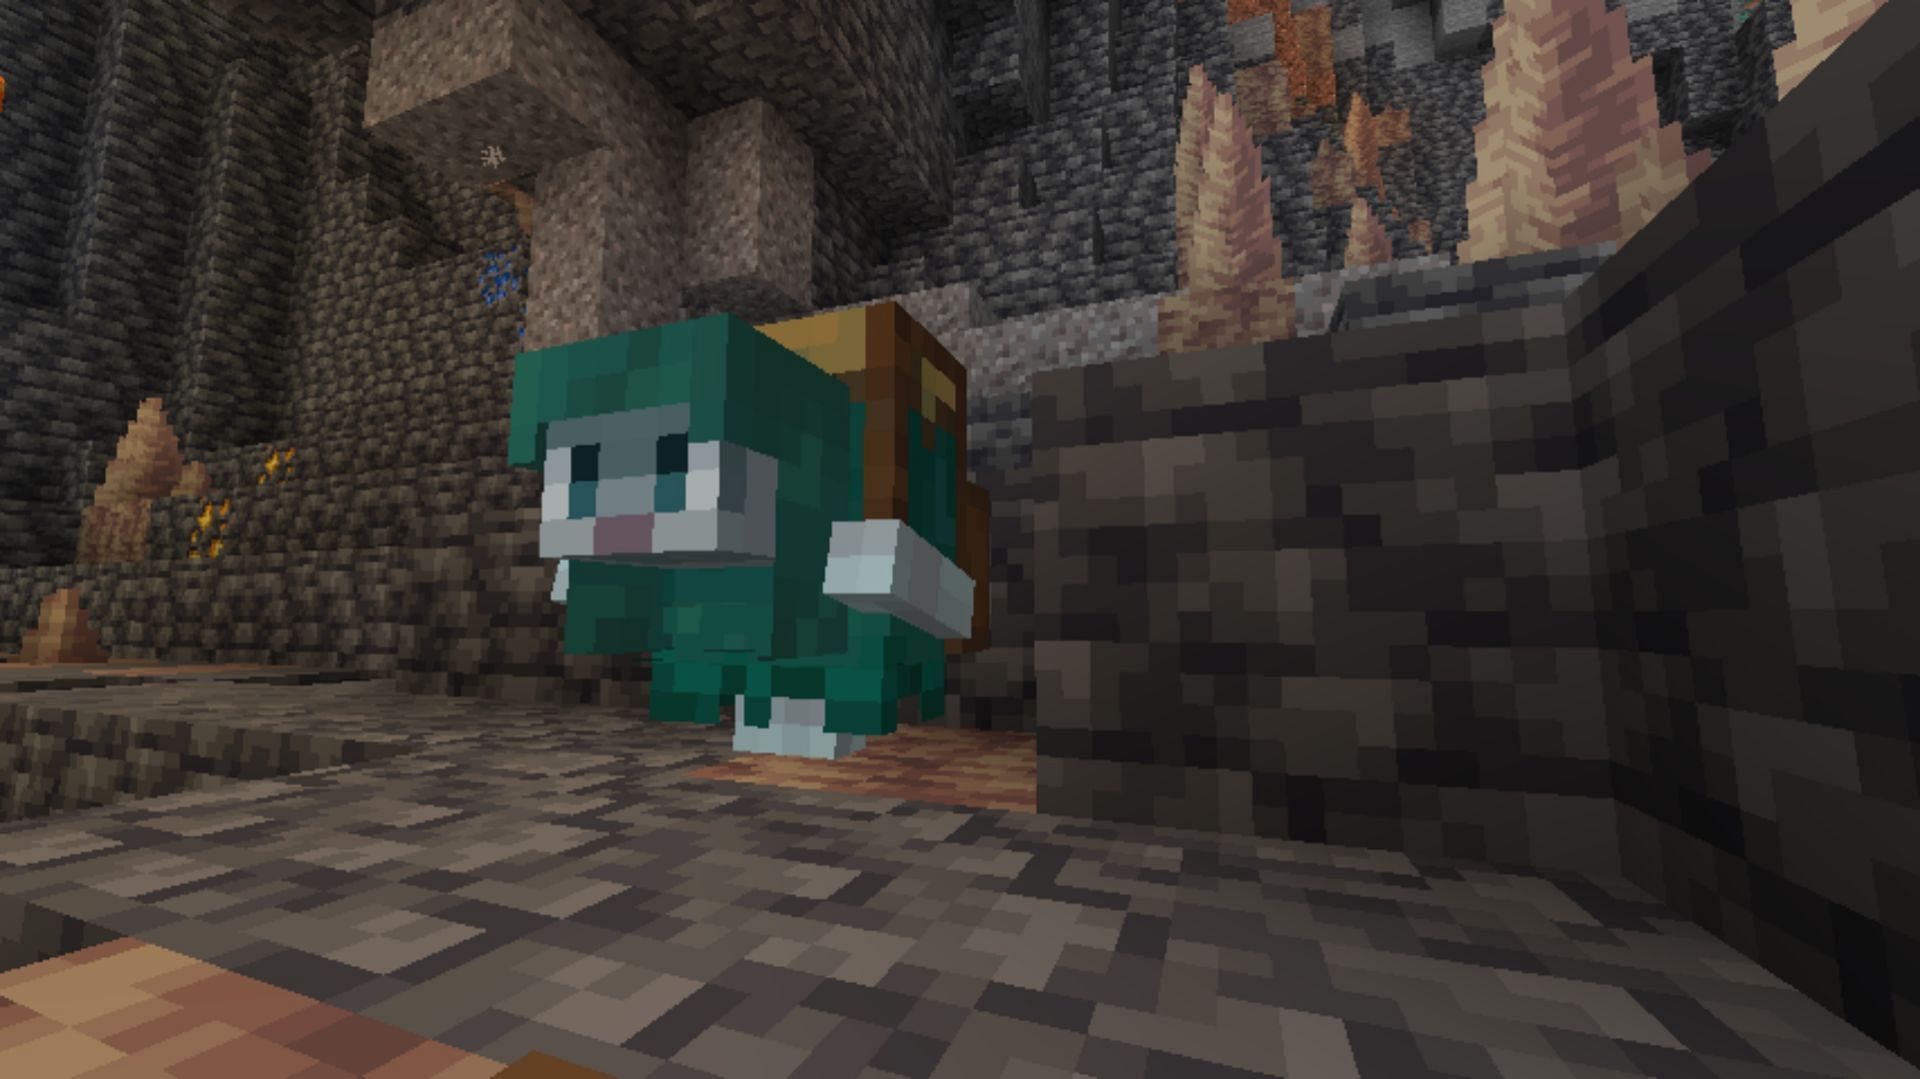 Rascal can play hide and seek, rewarding players those who find it three times in Minecraft (Image via CurseForge)